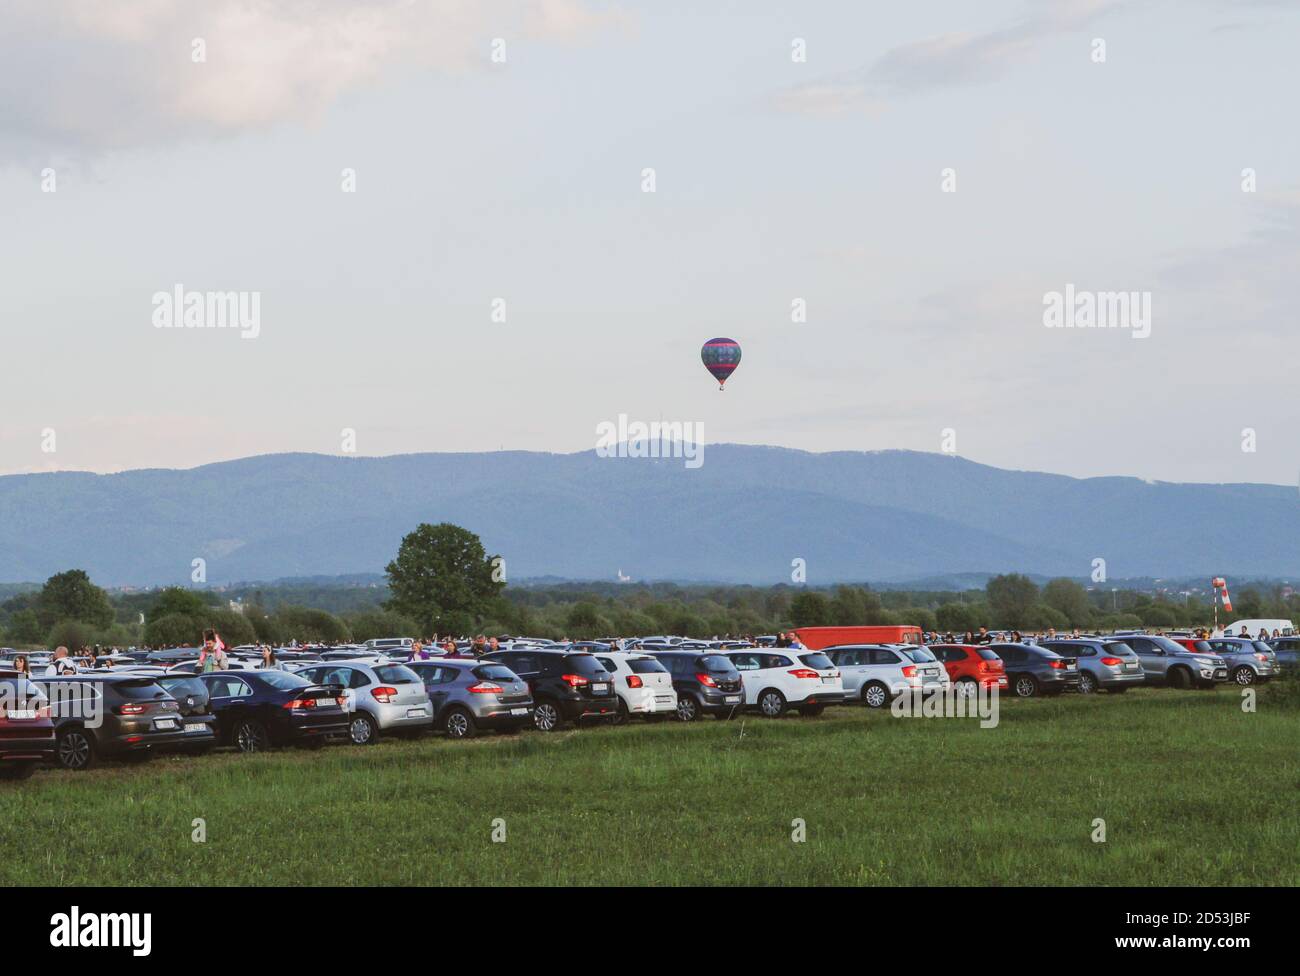 Zapresic/ Croatia-May 1st,2018: People attending hot air baloon festival, with numerous teams flying over the site, observed by the crowd Stock Photo